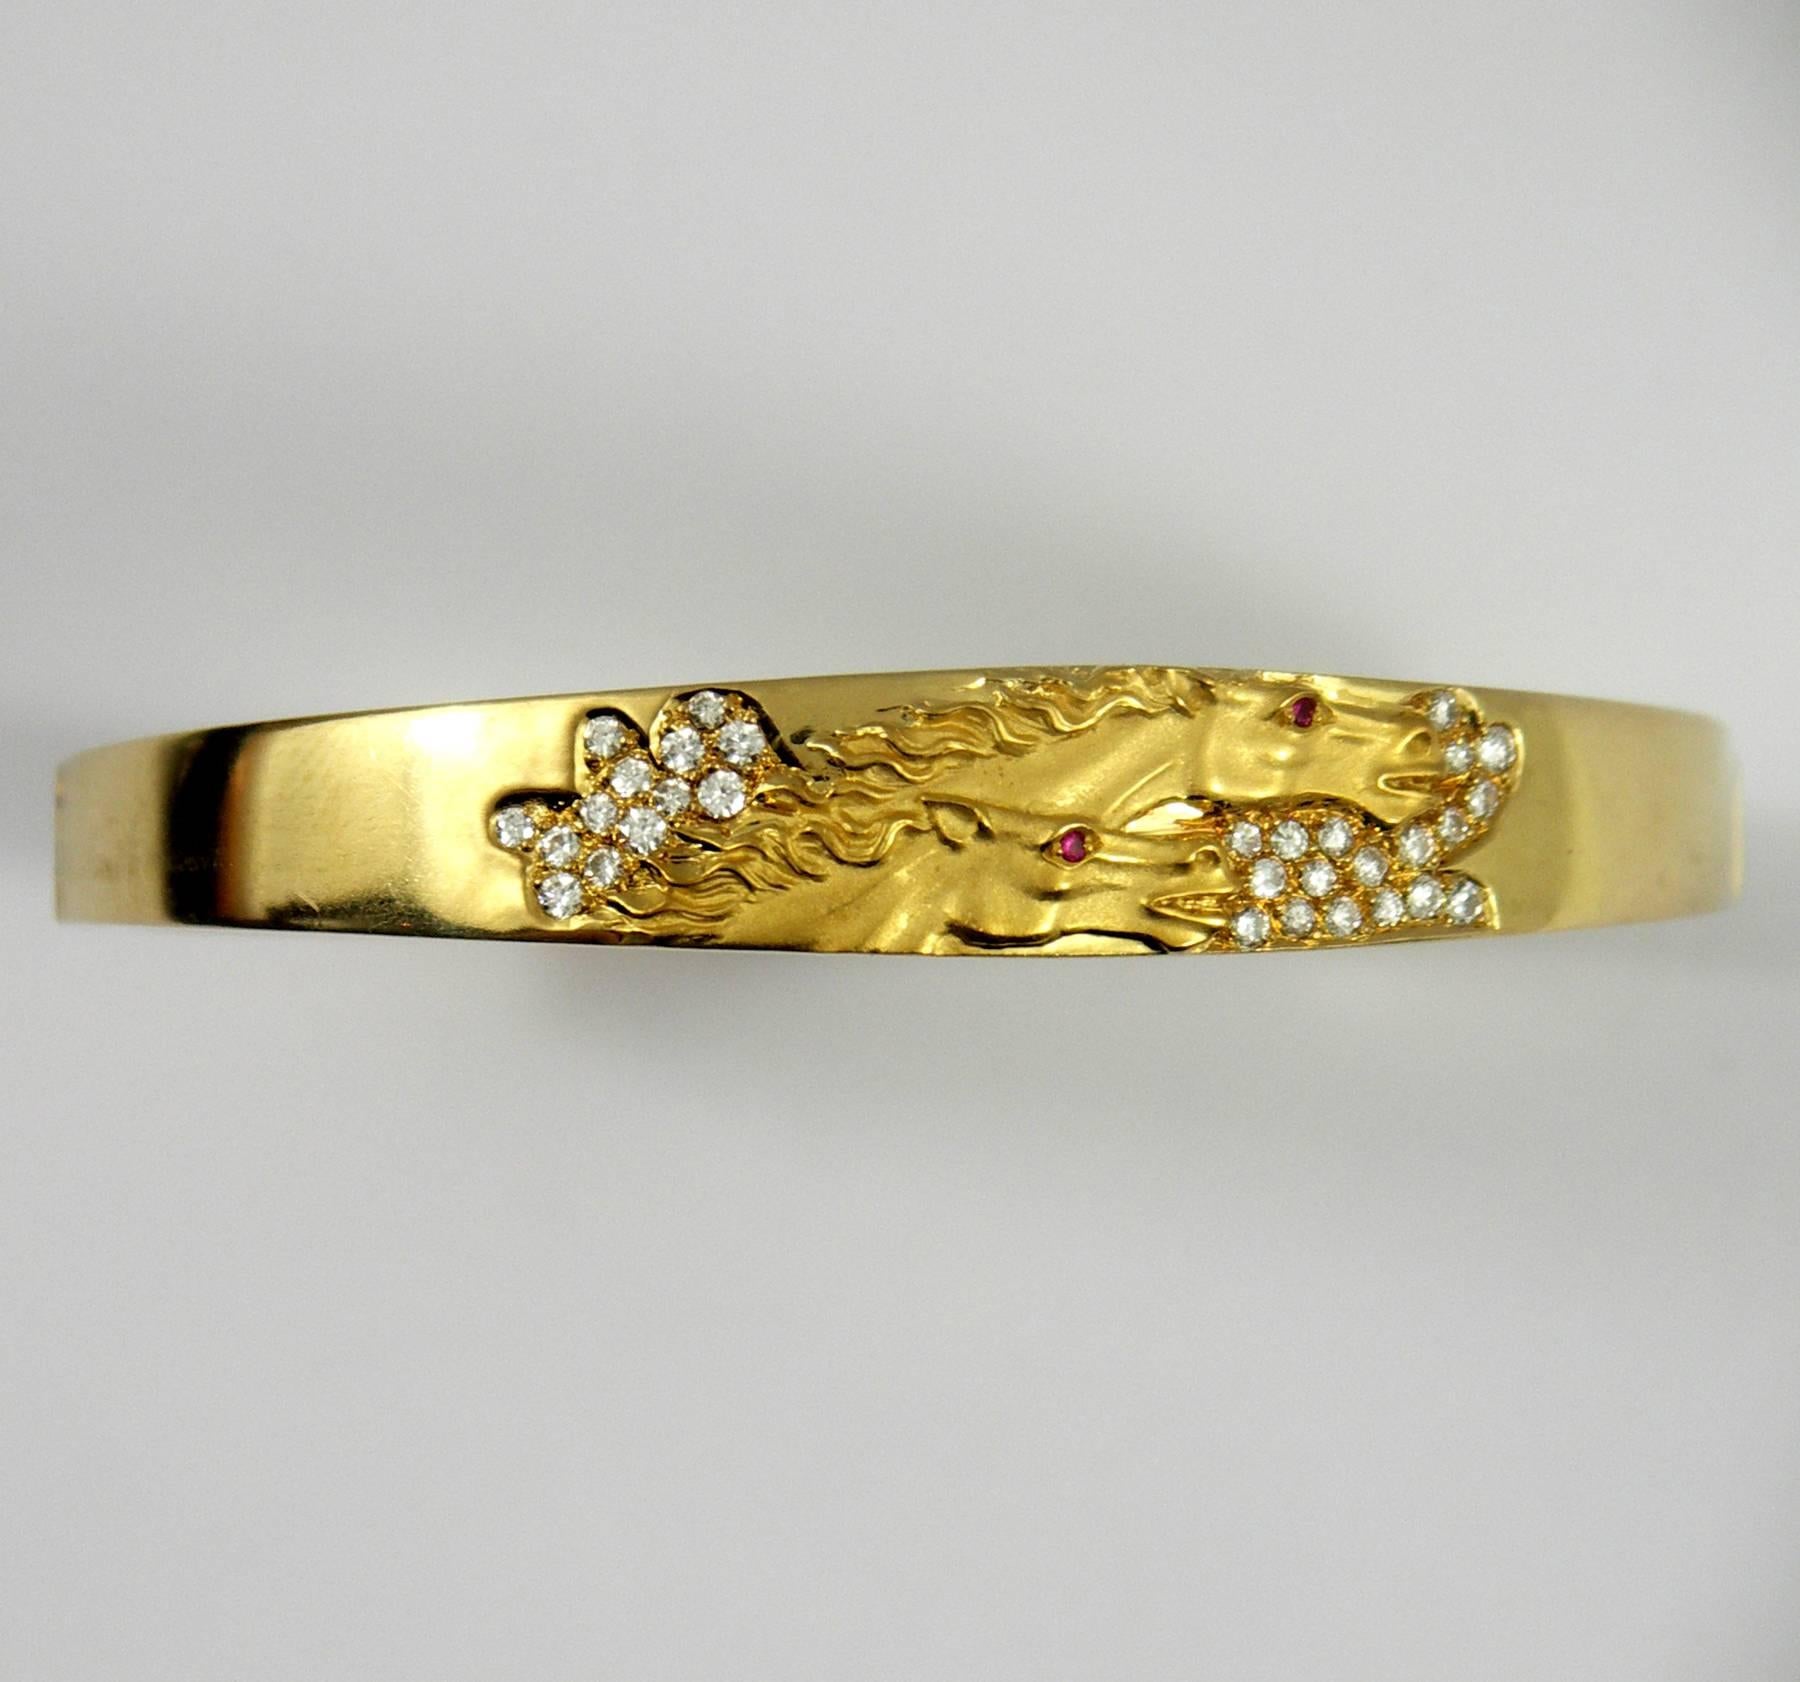 An 18K yellow gold hinged bangle bracelet by Carrera y Carrera, featuring two horse heads in profile, with ruby eyes. The 